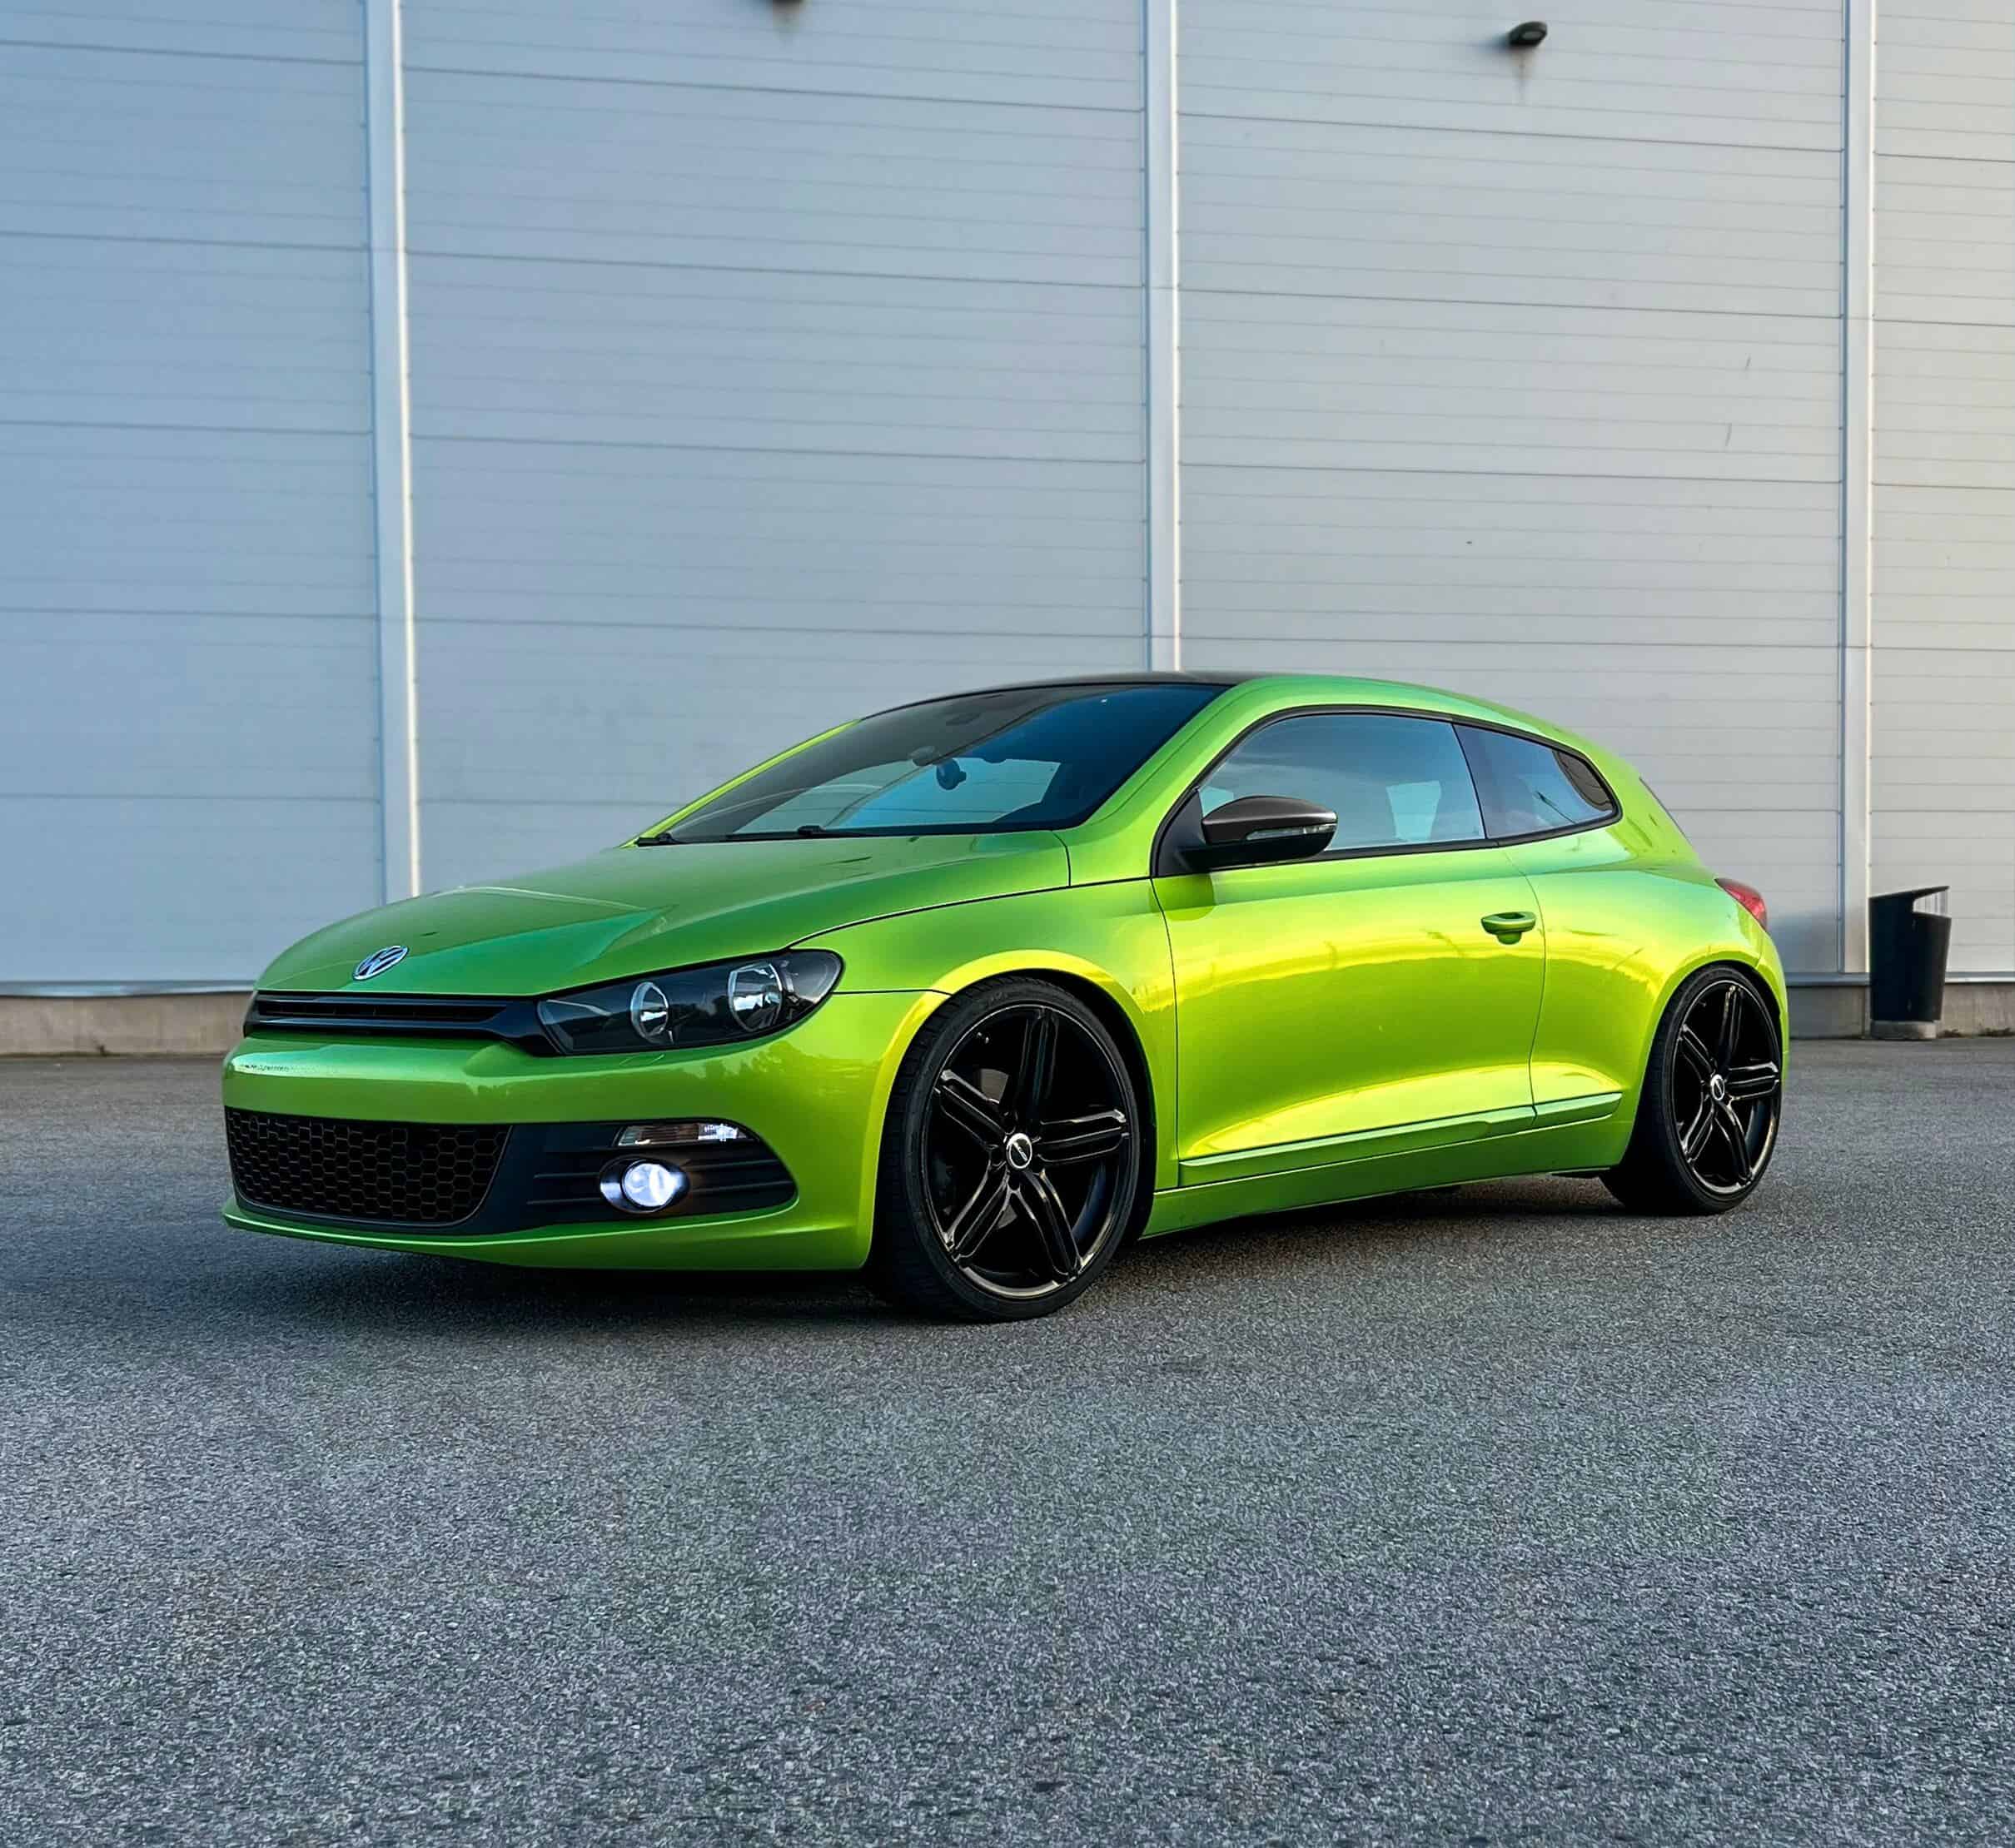 Green Volkswagen Scirocco: A sleek and dynamic coupe showcasing elegance and sporty design